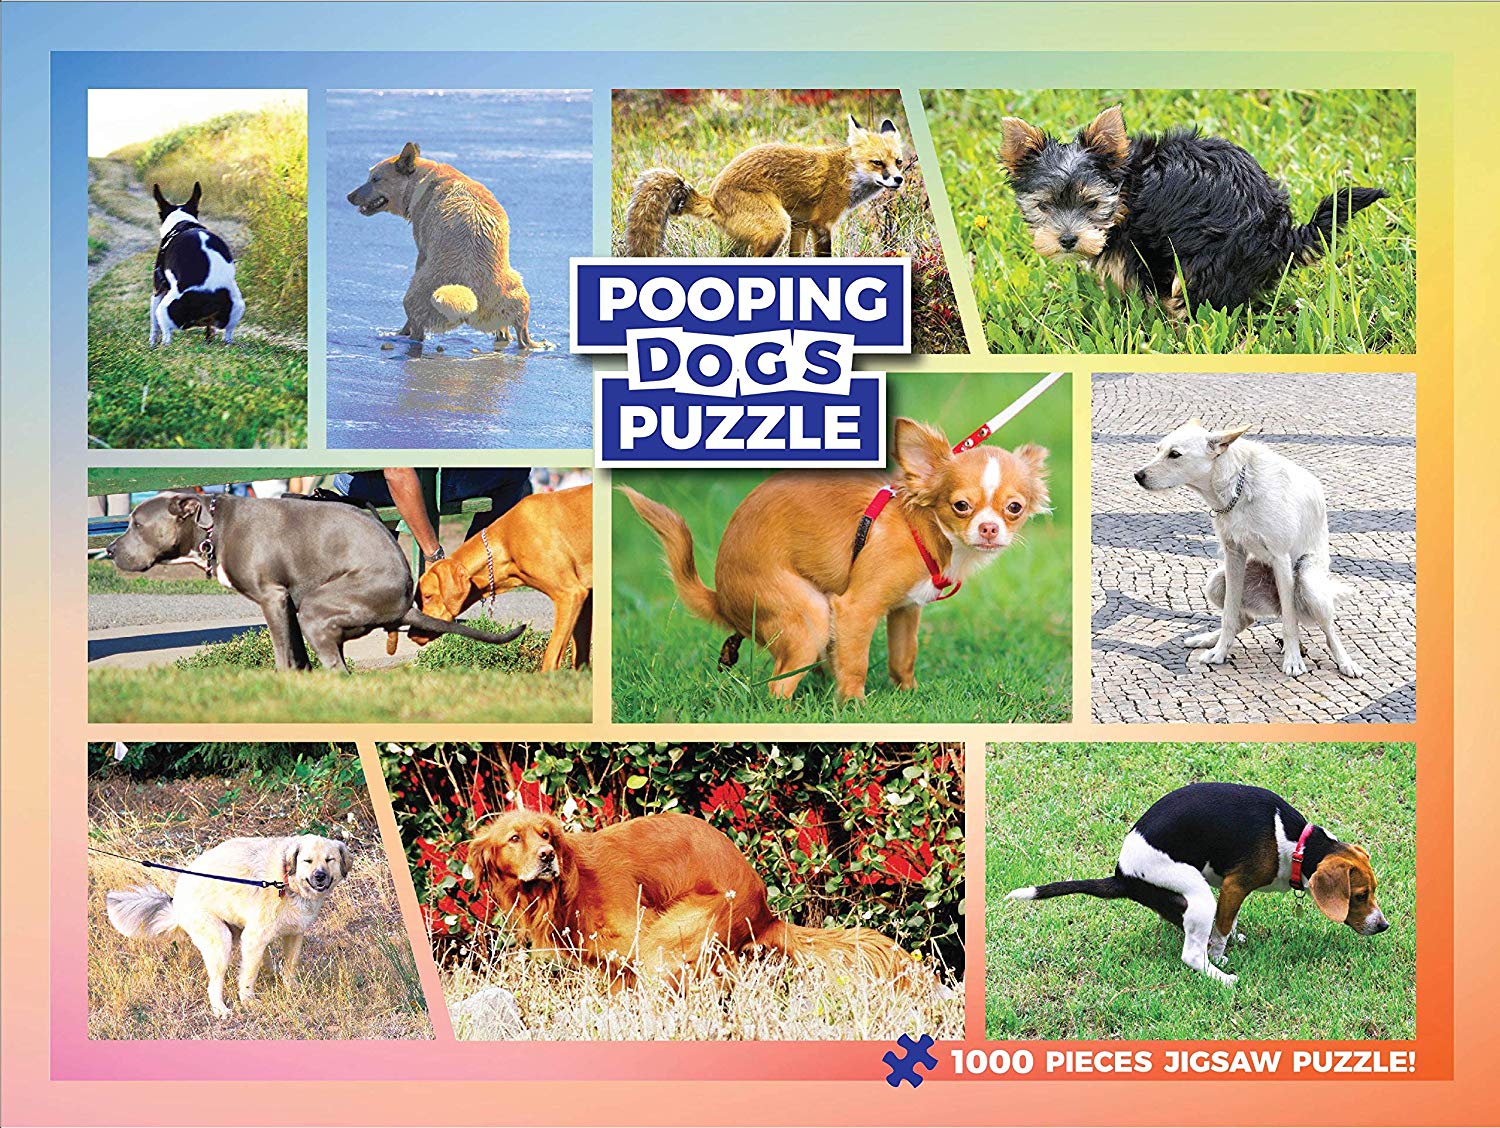 pooping-dogs-puzzle.jpg